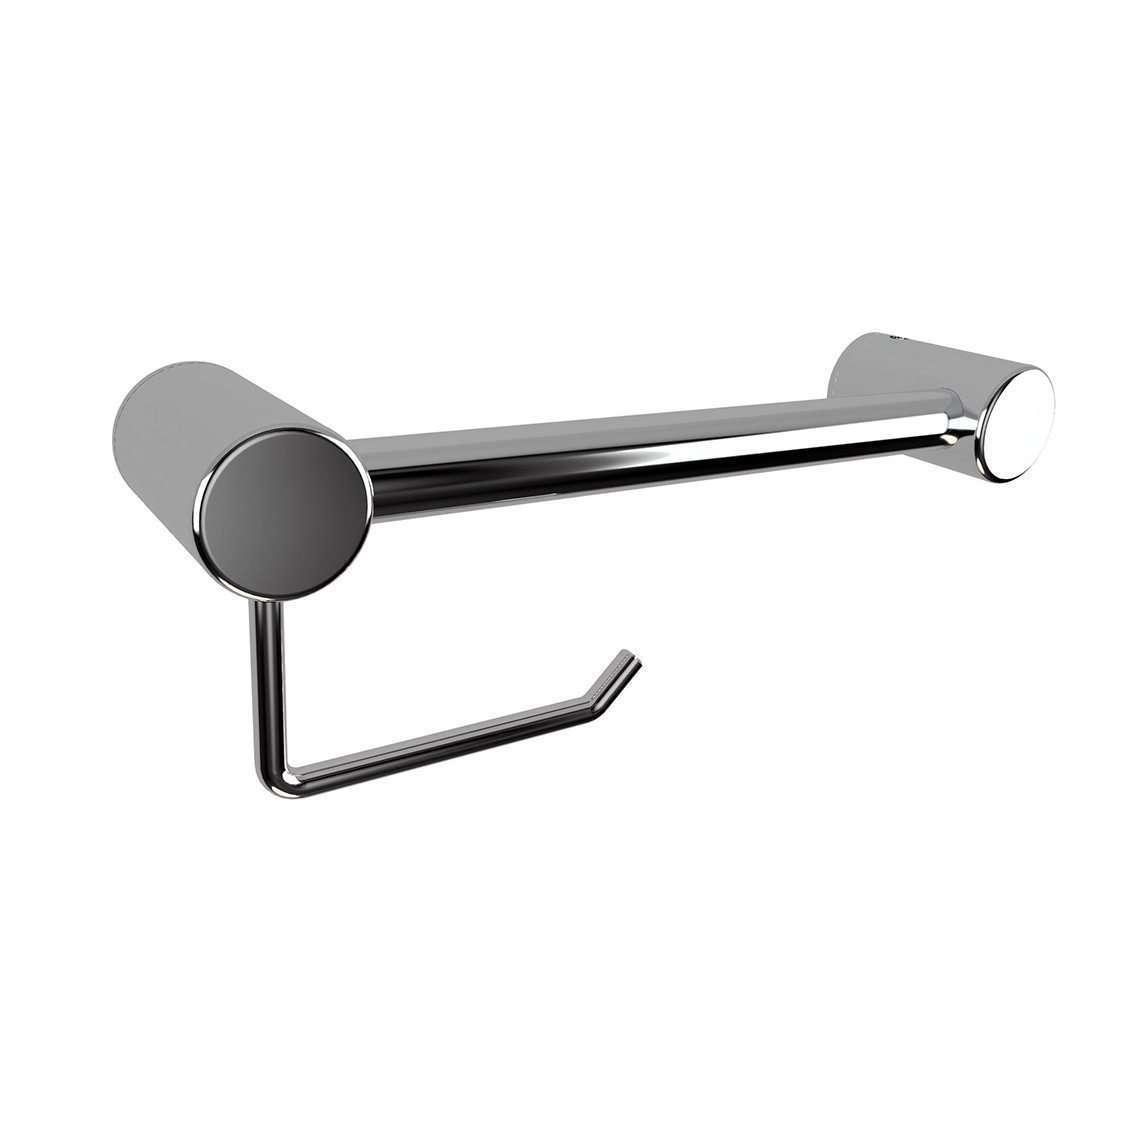 Availcare Calibre Ergo Toilet Roll Holder And 300mm Rail Chrome - Burdens Plumbing